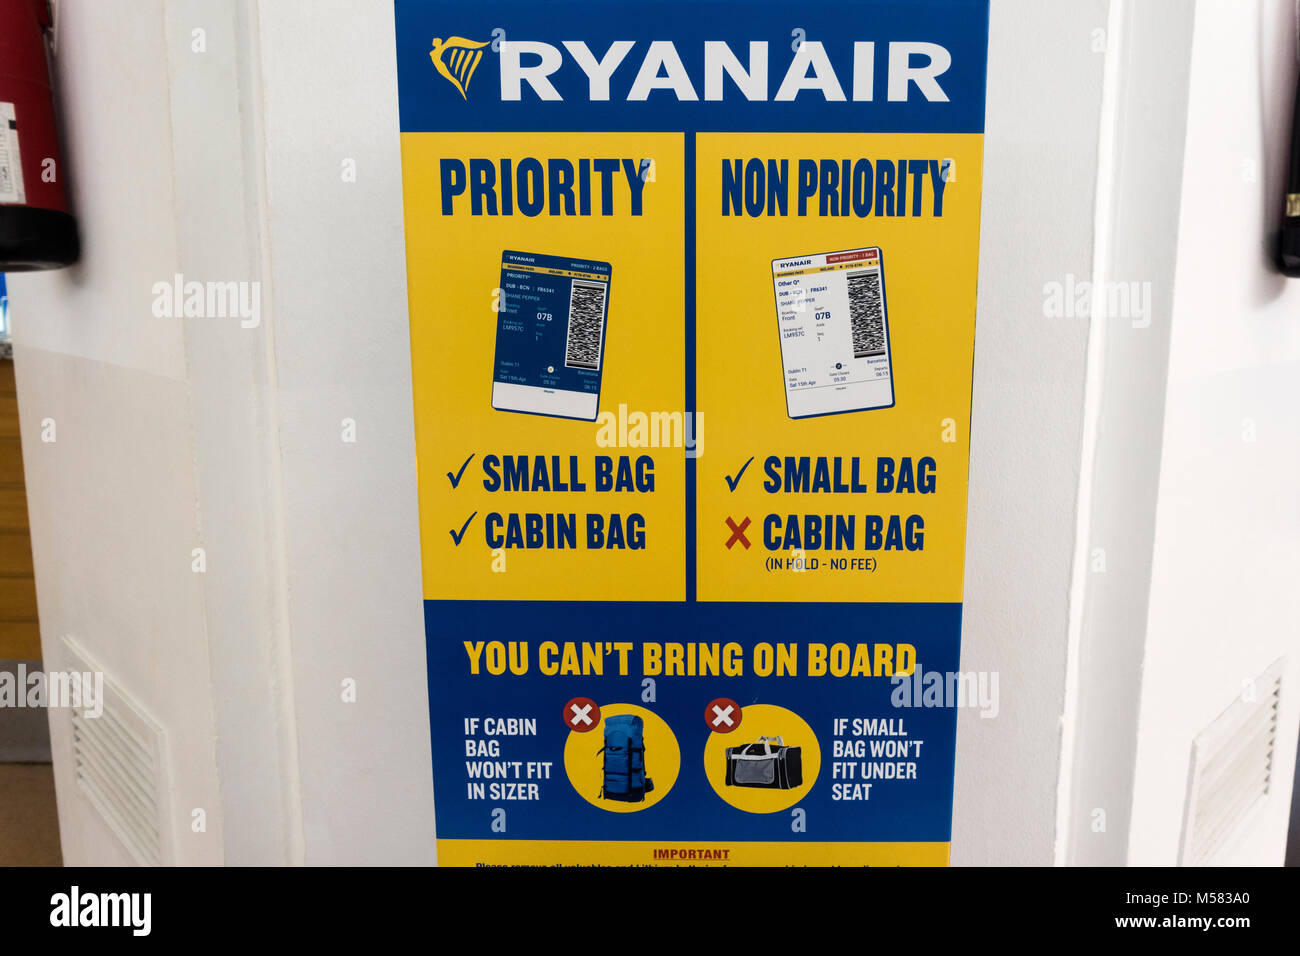 Ryanair new 2018 Cabin Baggage Rules, Hand Luggage size checker Stock Photo: 175355208 - Alamy